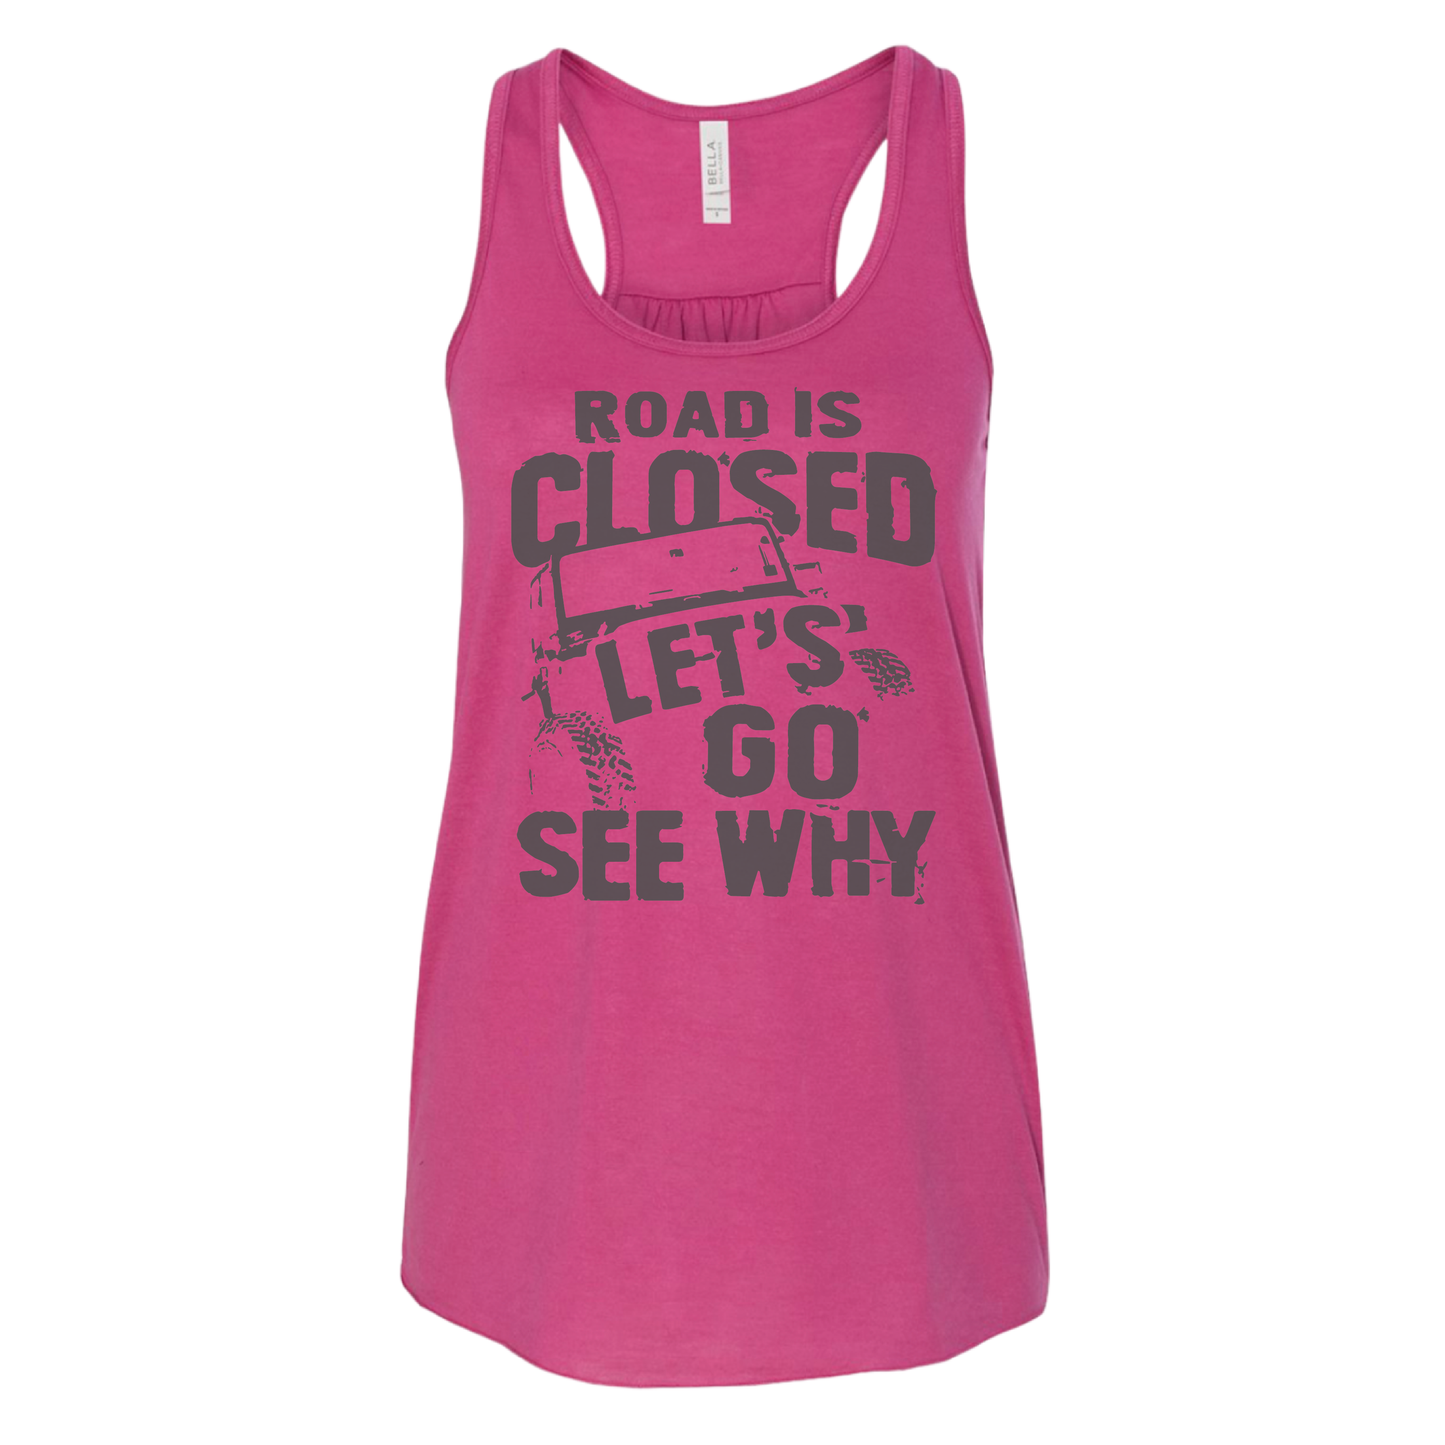 Road Closed - Shirt, Tank Top, Long Sleeve or Hoodie - Available in Multiple Colors